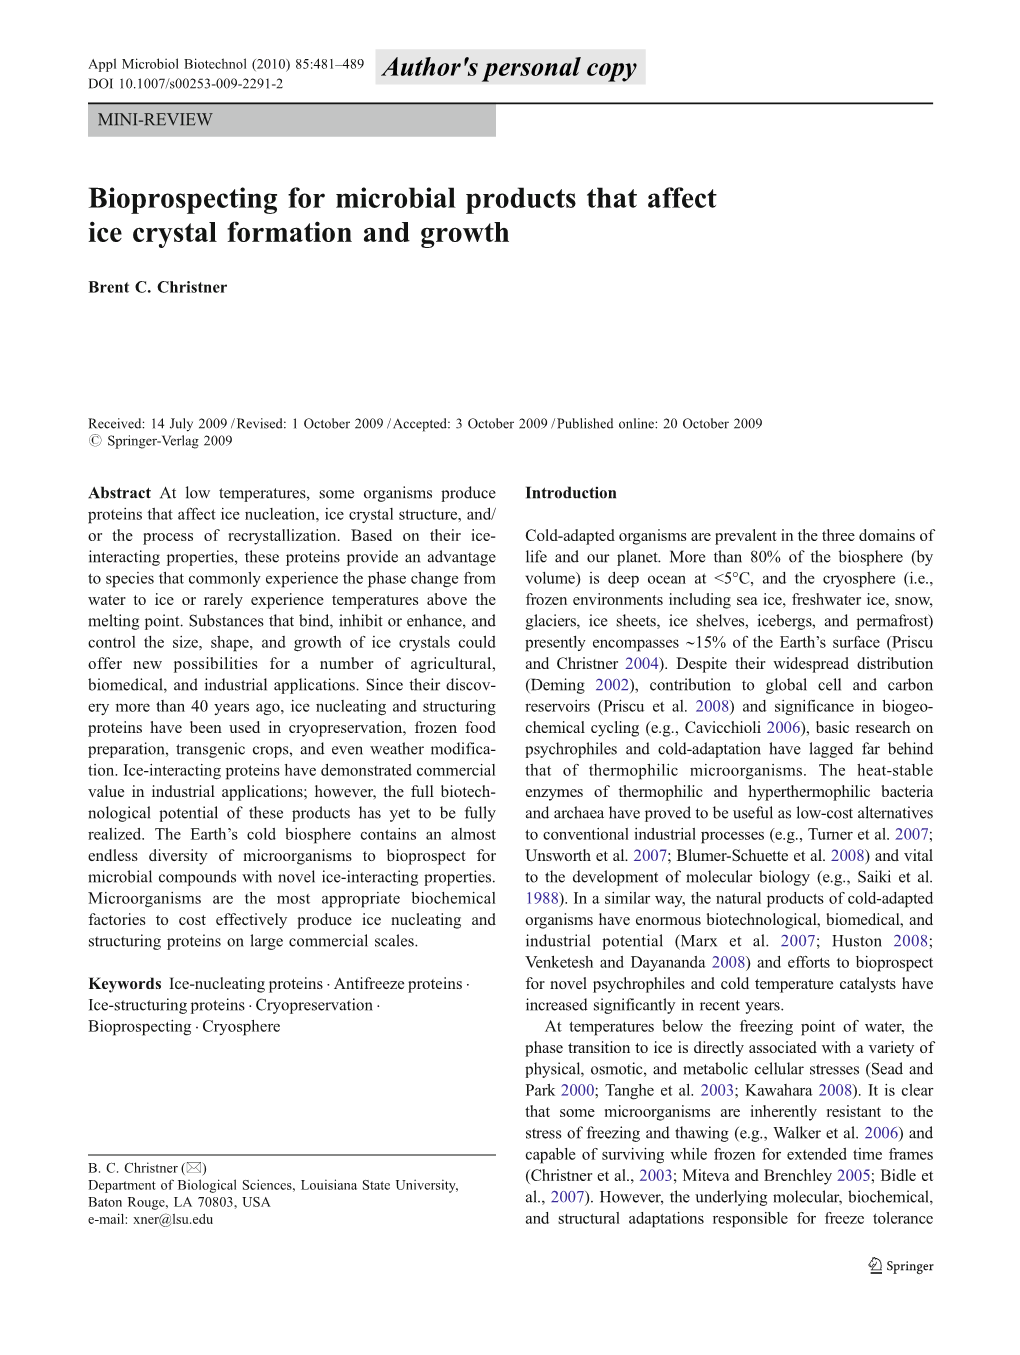 Bioprospecting for Microbial Products That Affect Ice Crystal Formation and Growth